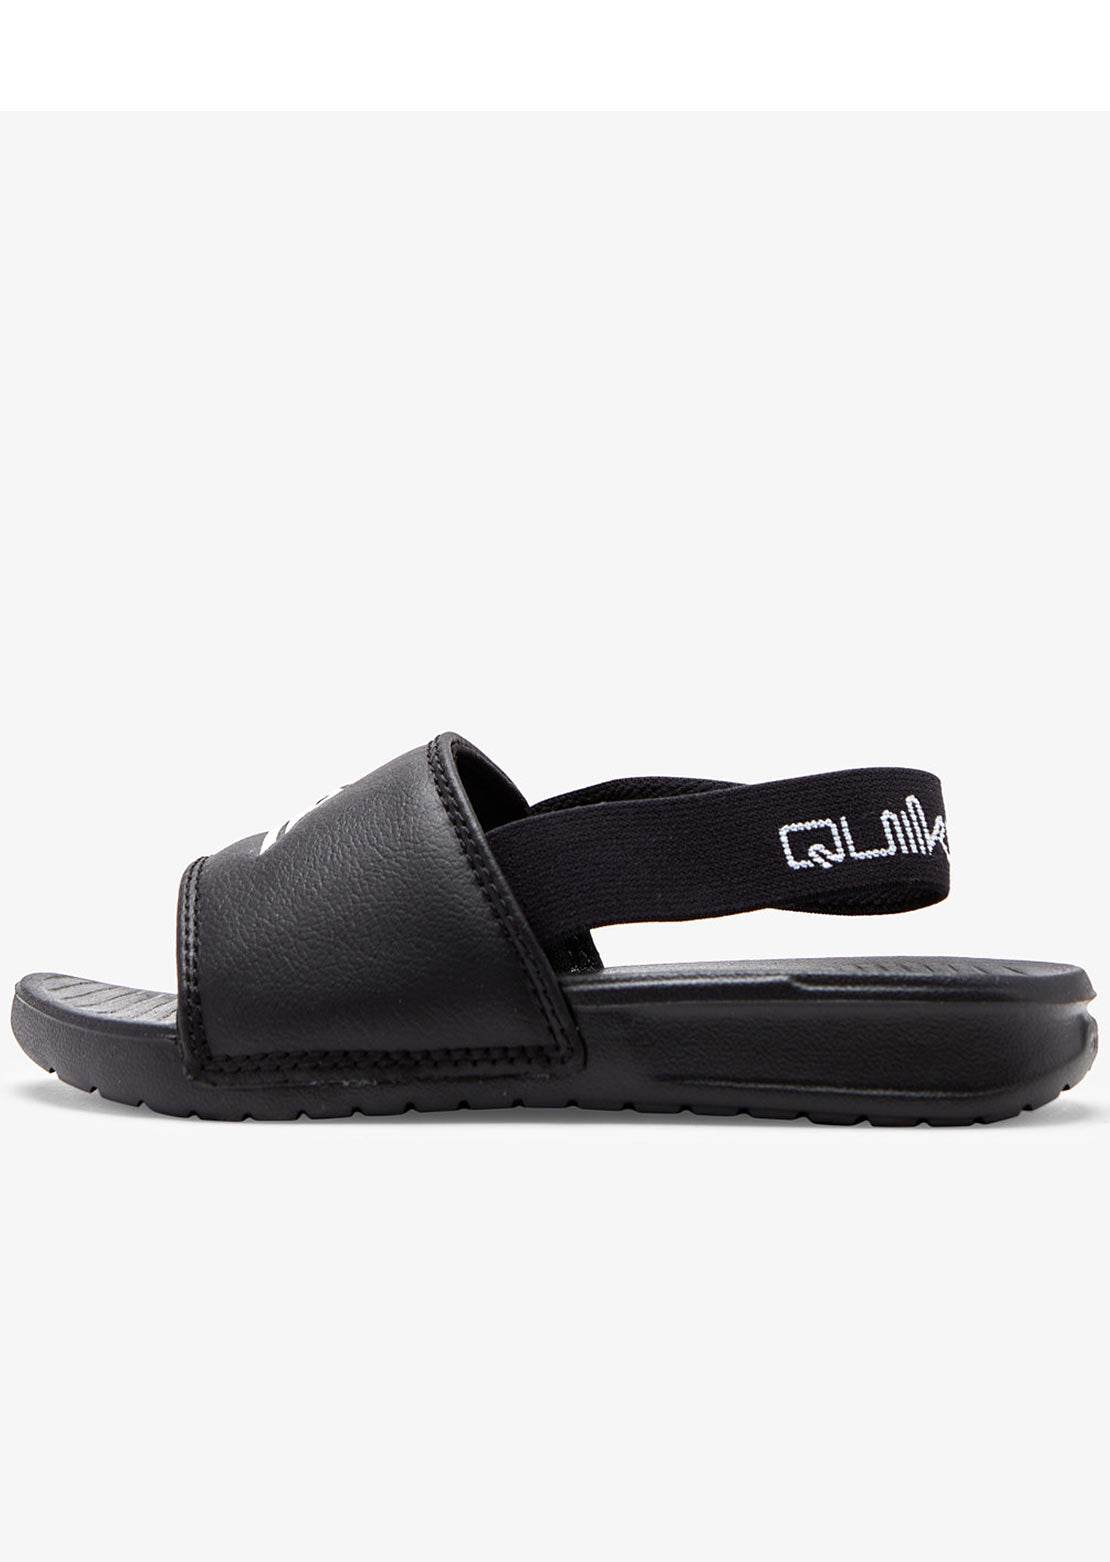 Quiksilver Toddler Bright Coast Strapped Sandals Black/White/Black